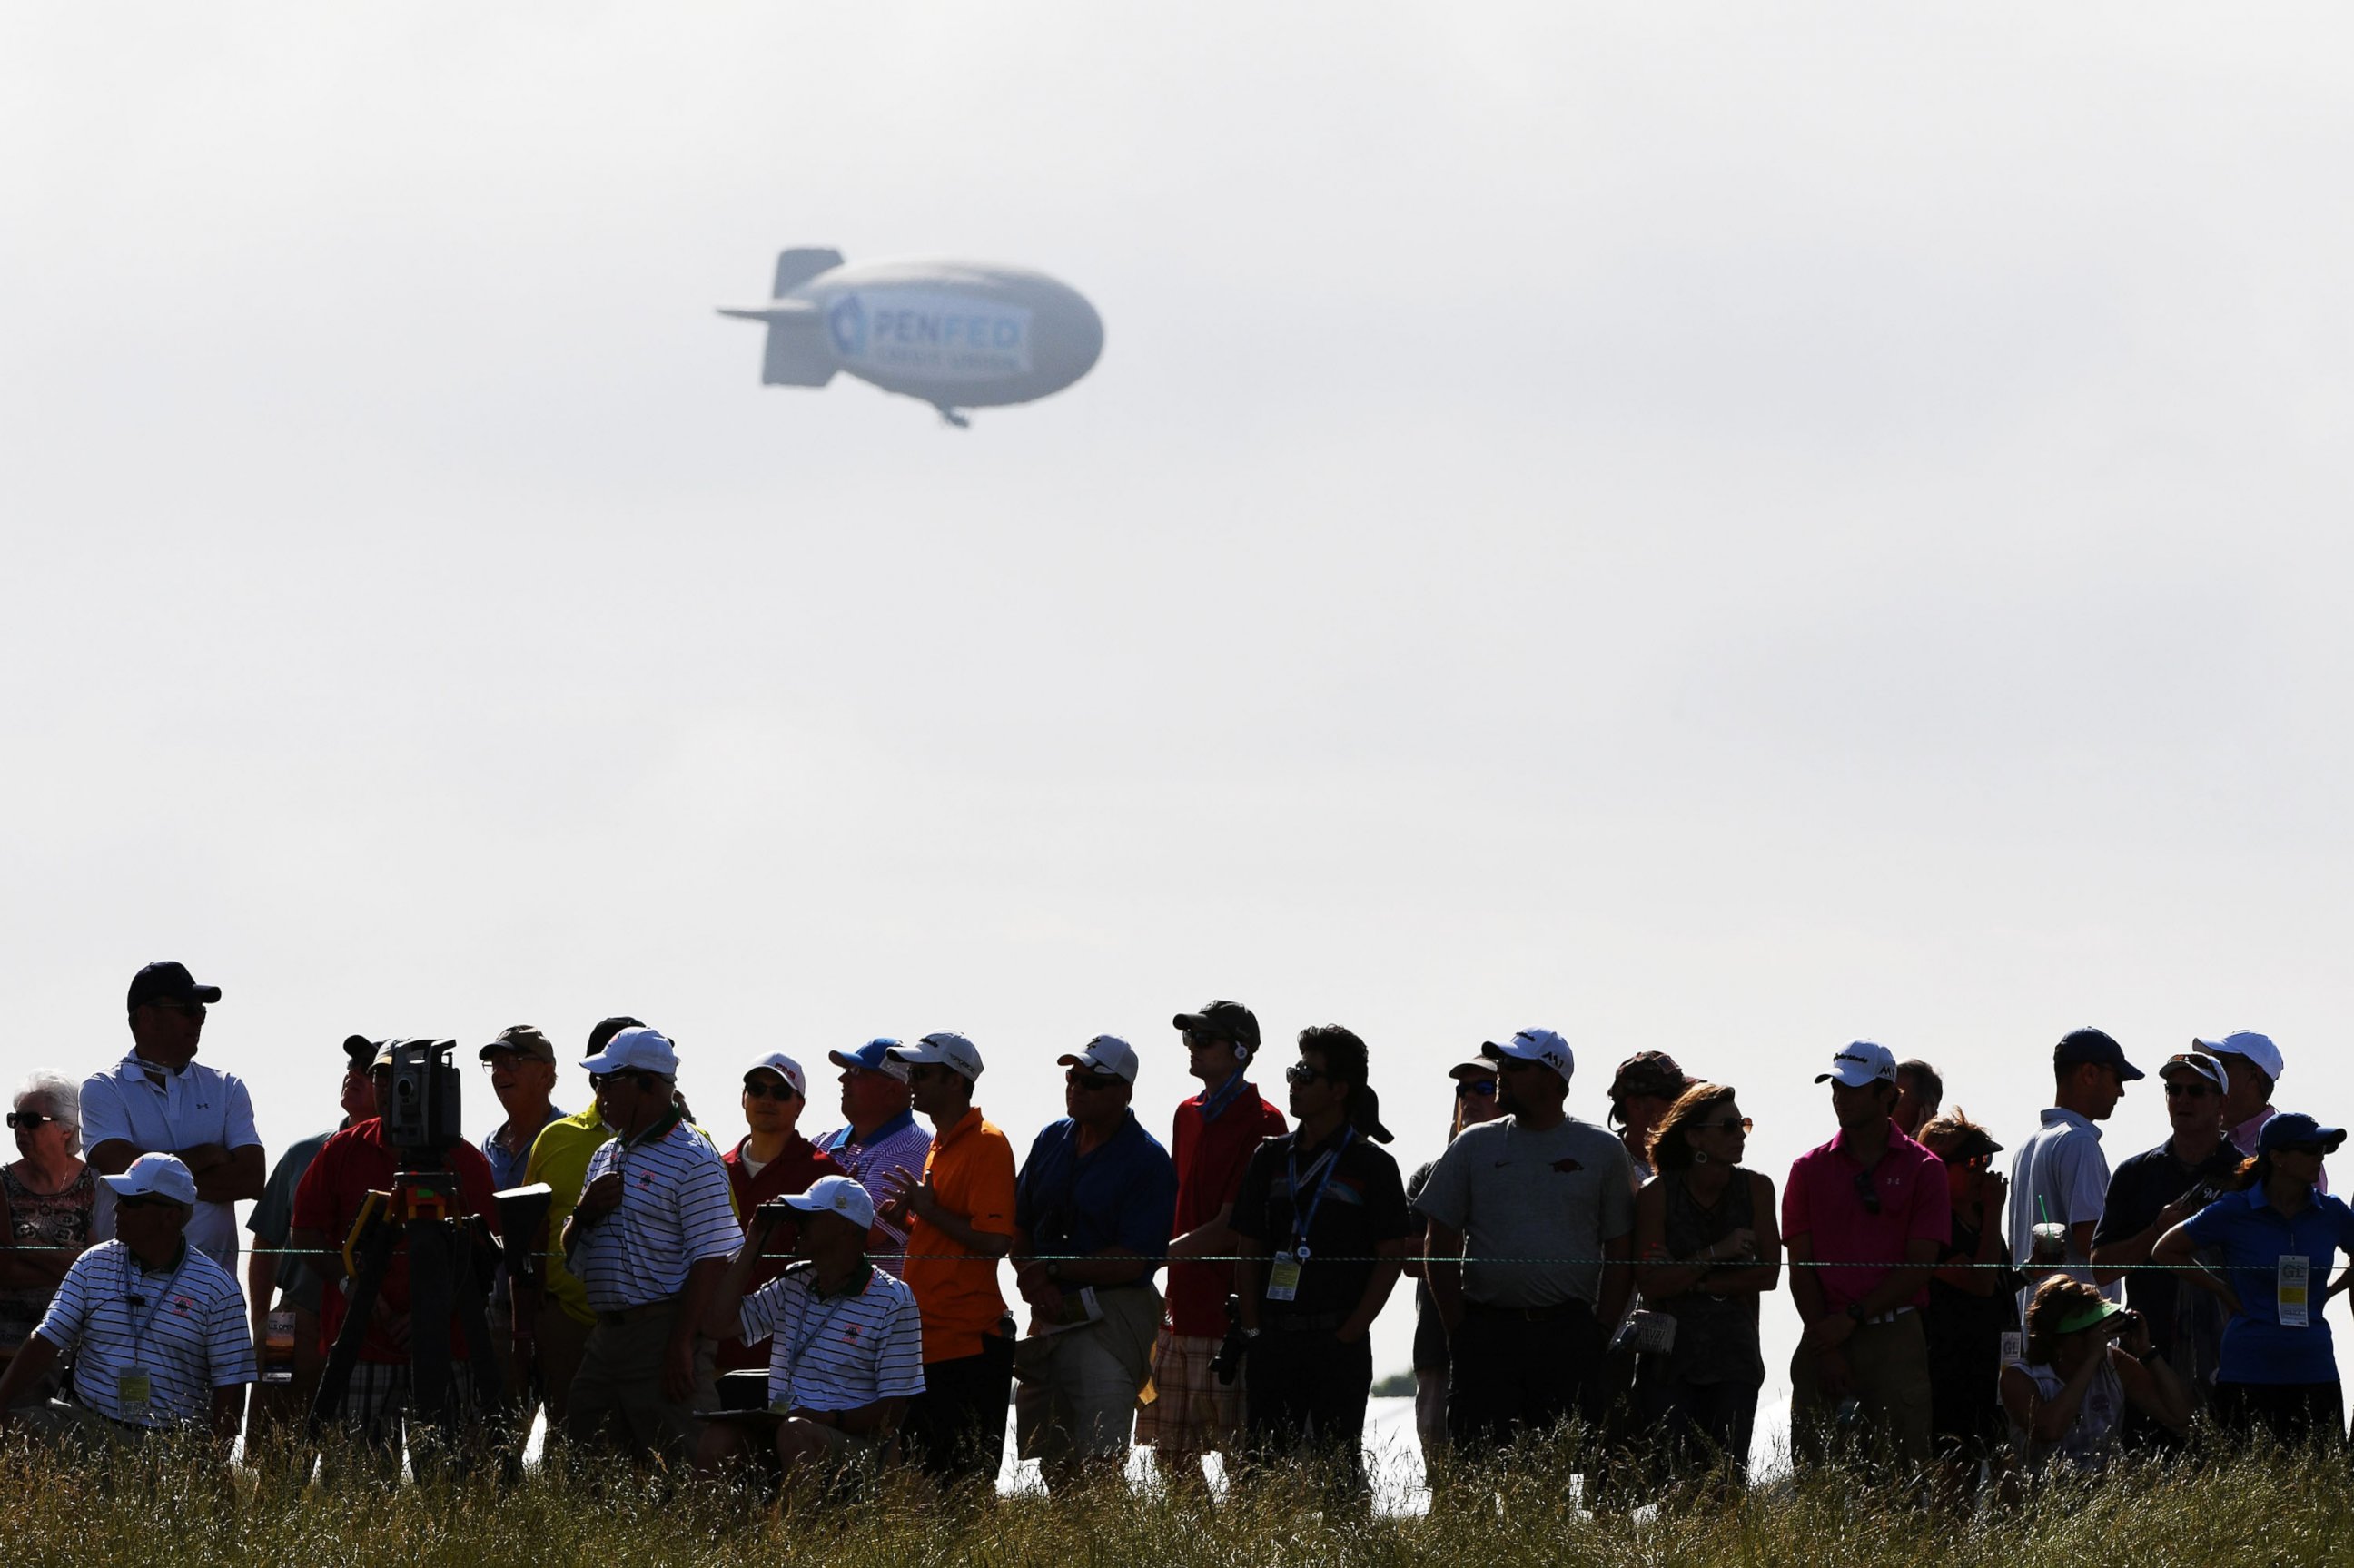 PHOTO: A blimp floats over the crowd during the first round of the 2017 U.S. Open at Erin Hills on June 15, 2017 in Hartford, Wis.